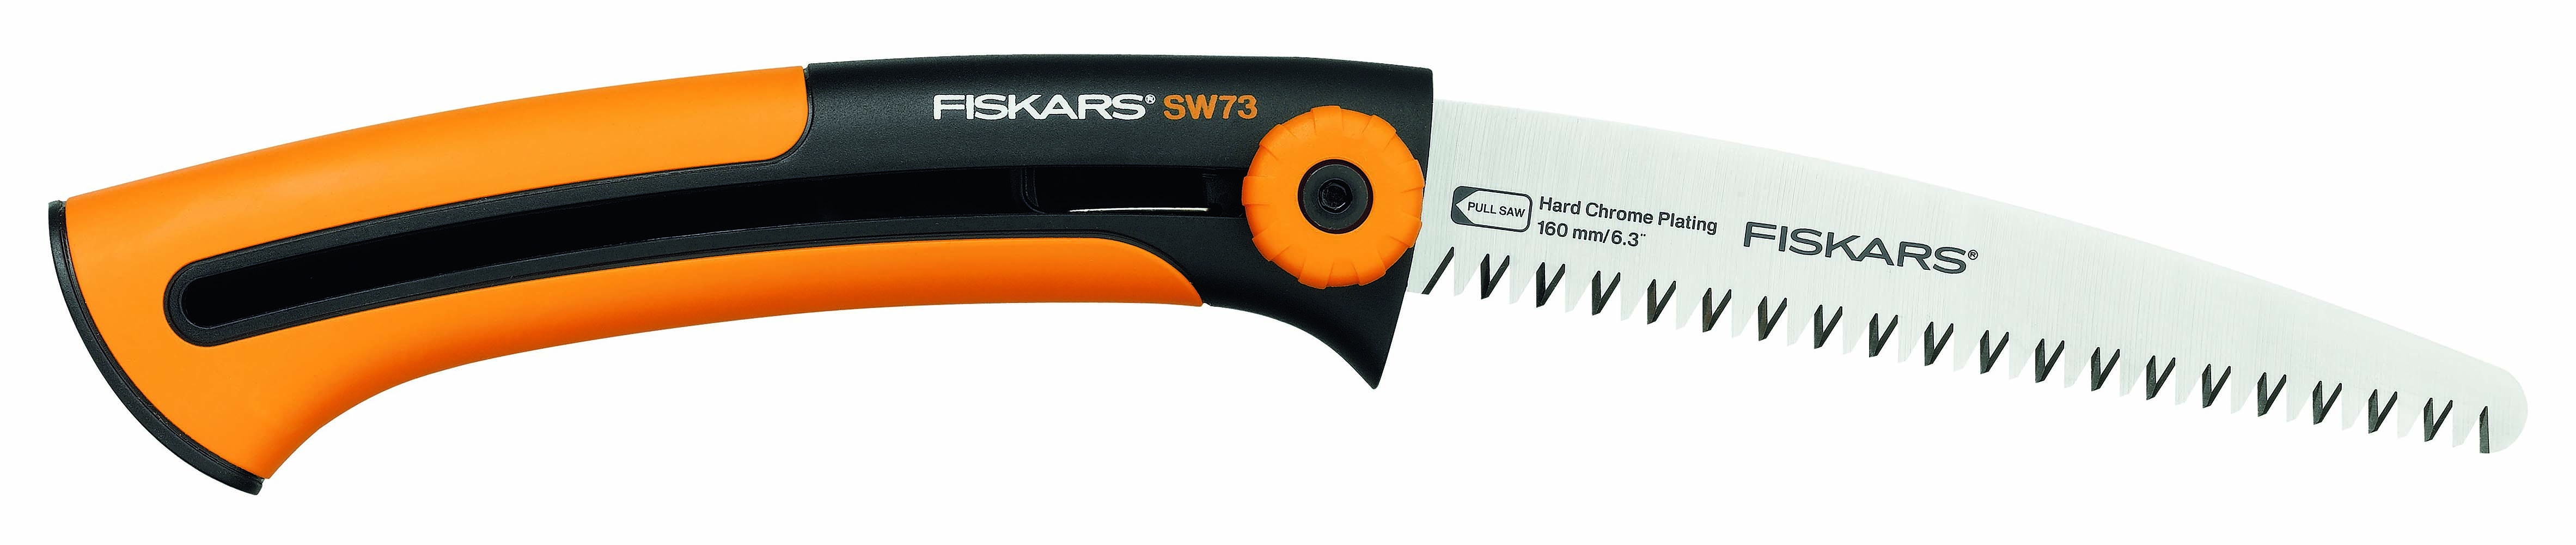 7518015 A strong retractable saw. Thanks to the fully retractable blade and handy belt clip, the saw is safe and always within reach. The cleverly designed blade with double serrations ensures a quick and efficient operation. Ideal for trimming shrubs, tree pruning and limbing branches. This saw has an excellent grip thanks to the comfortable and ergonomically designed soft grip handle with finger protection.